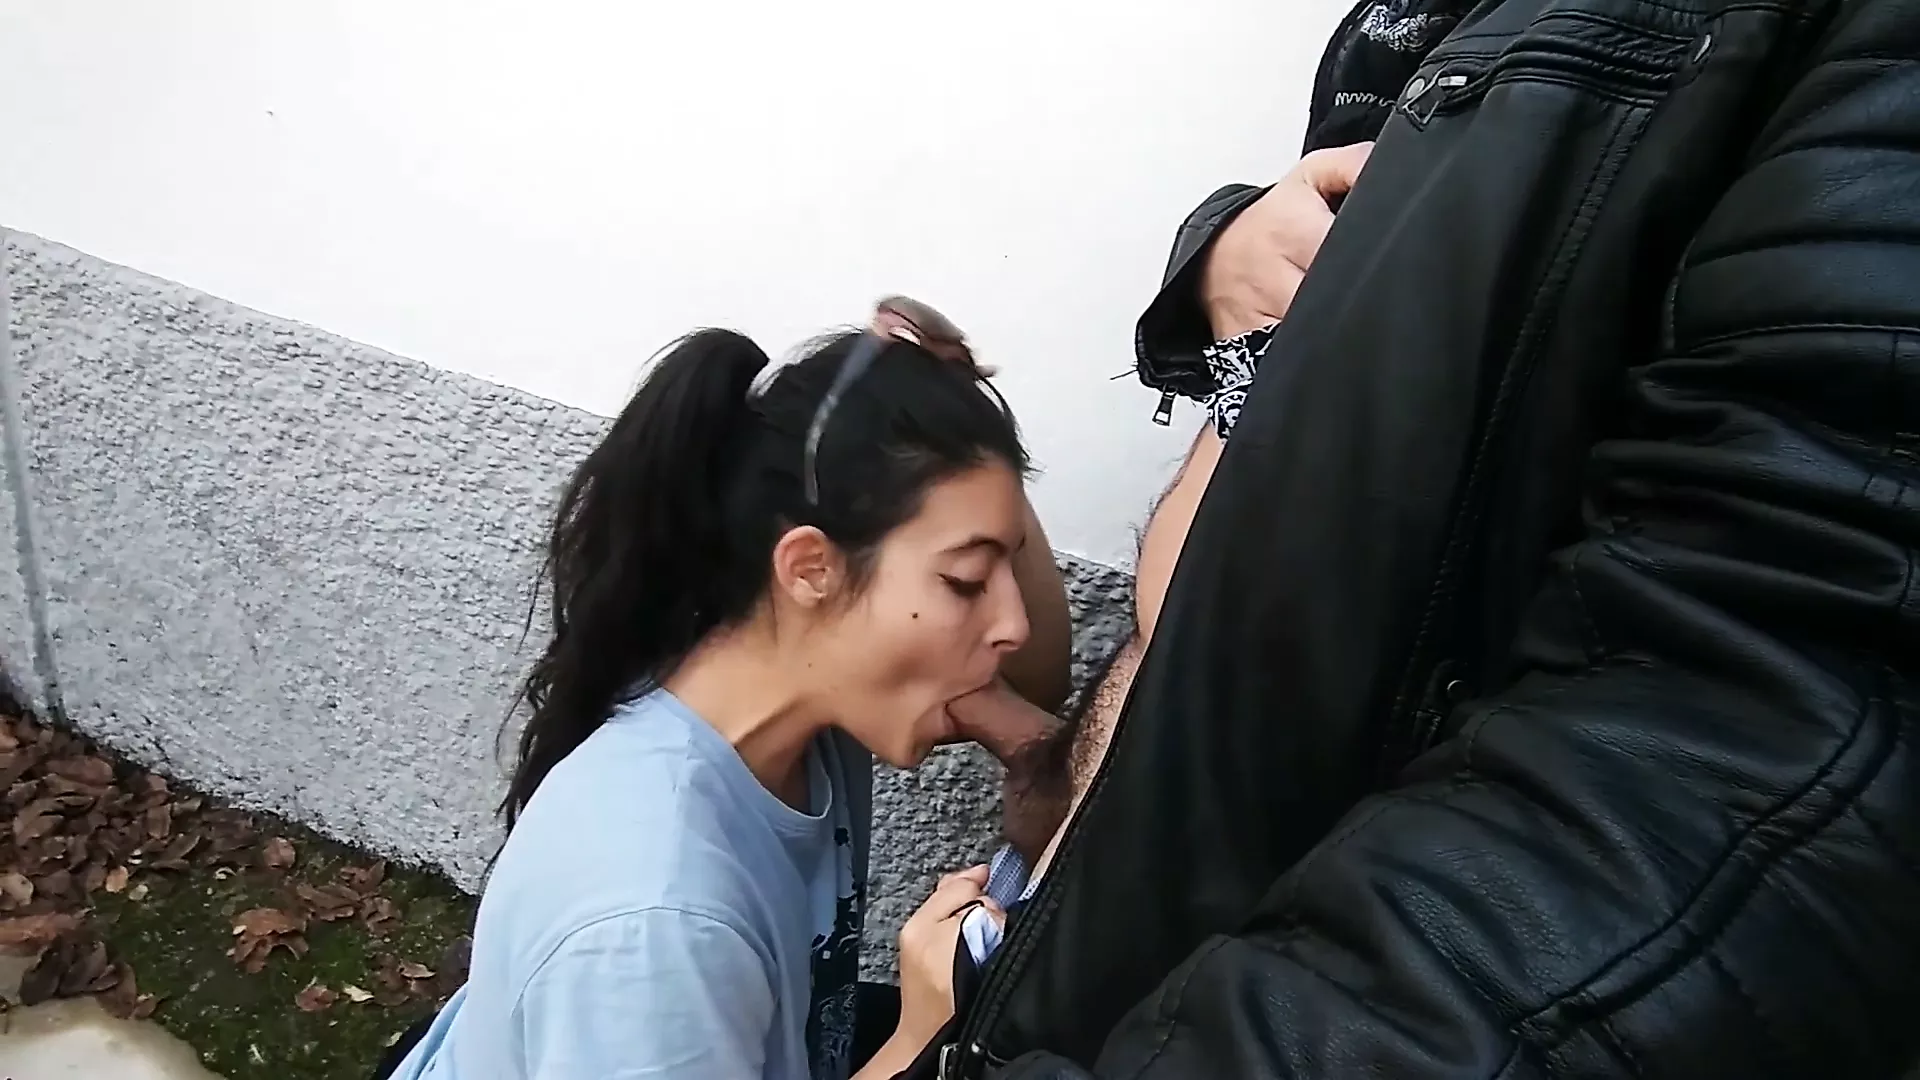 Risky Public Blowjob In The Street With Cumshot In The Mouth And They Almost Caught Us